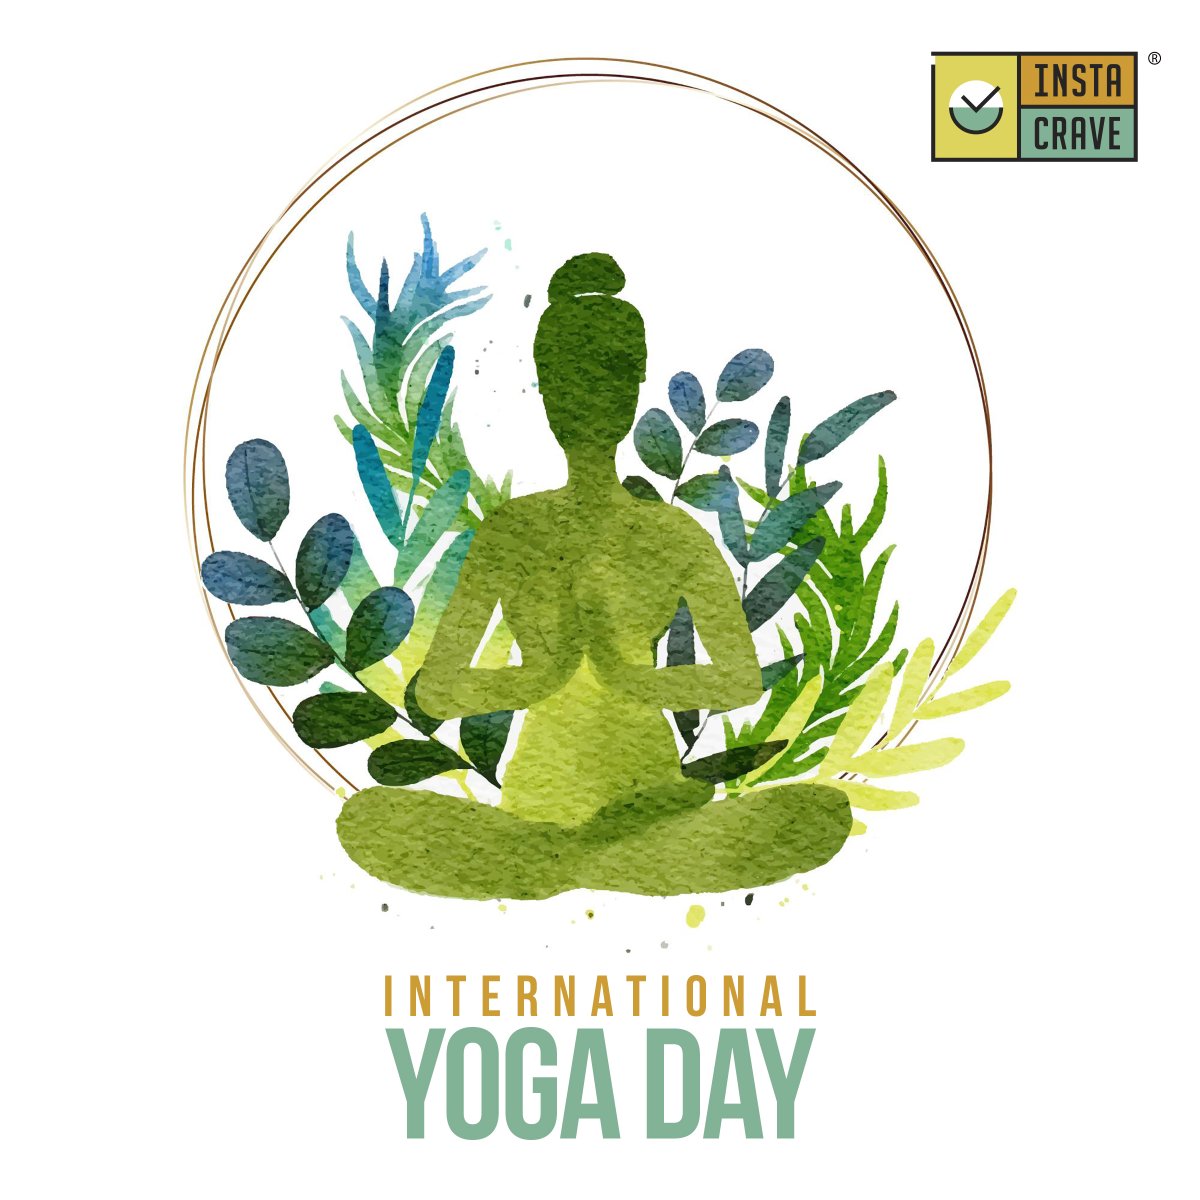 Take a pledge on this International yoga day to eat good, eat healthy and be fit ♥️♥️ Happy International Yoga day to everyone..😍😍😍 . . . #instacrave #yogaday #yogapractice #yogadayeveryday #yogaday2020 #yogainspiration #yogalife #yogadays #internationalyogaday